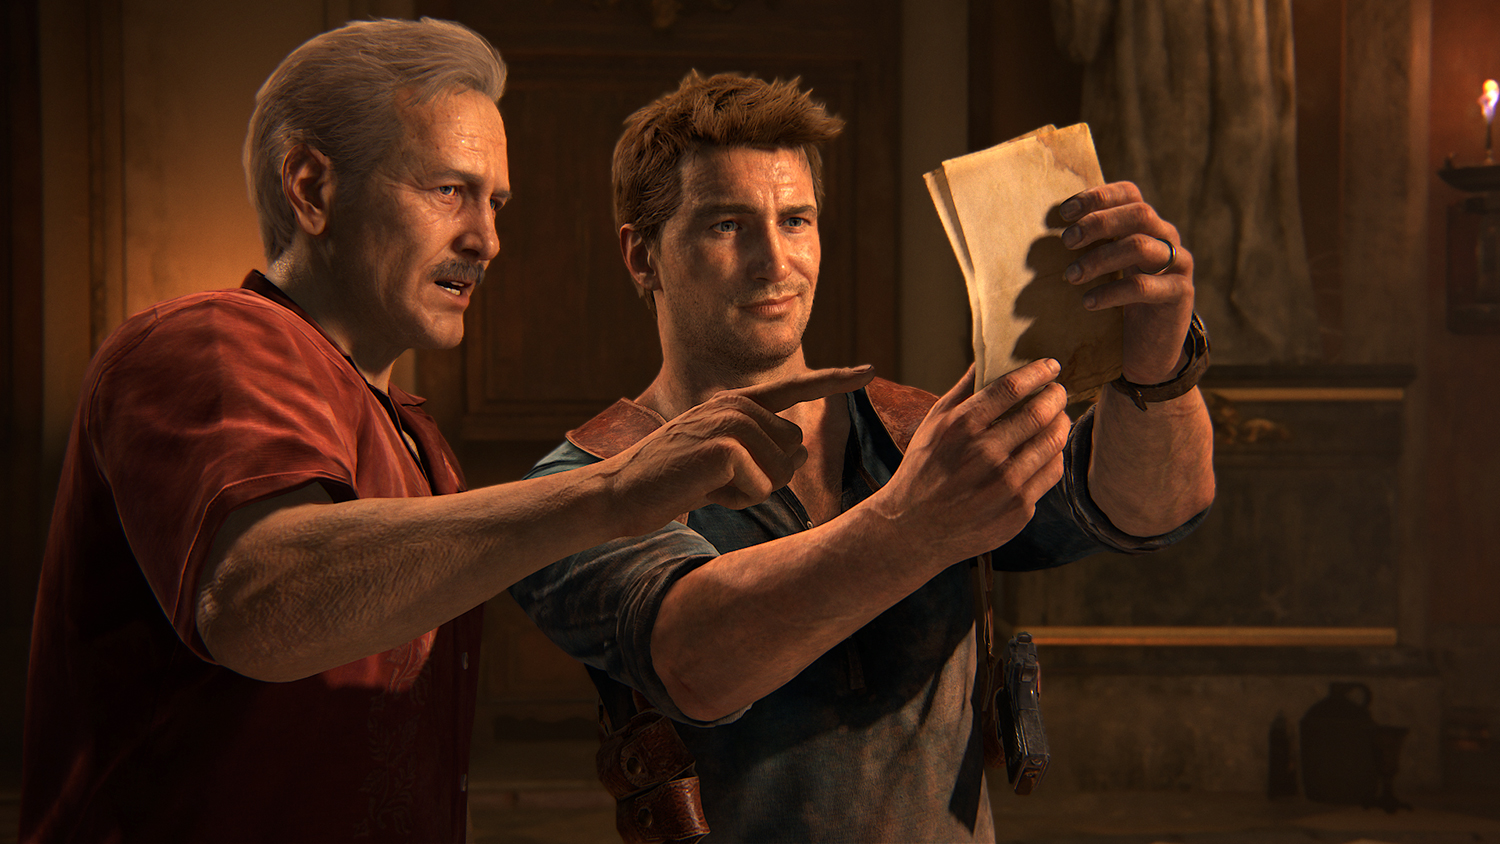 Uncharted' is fun but lacks an emotional core that will make you